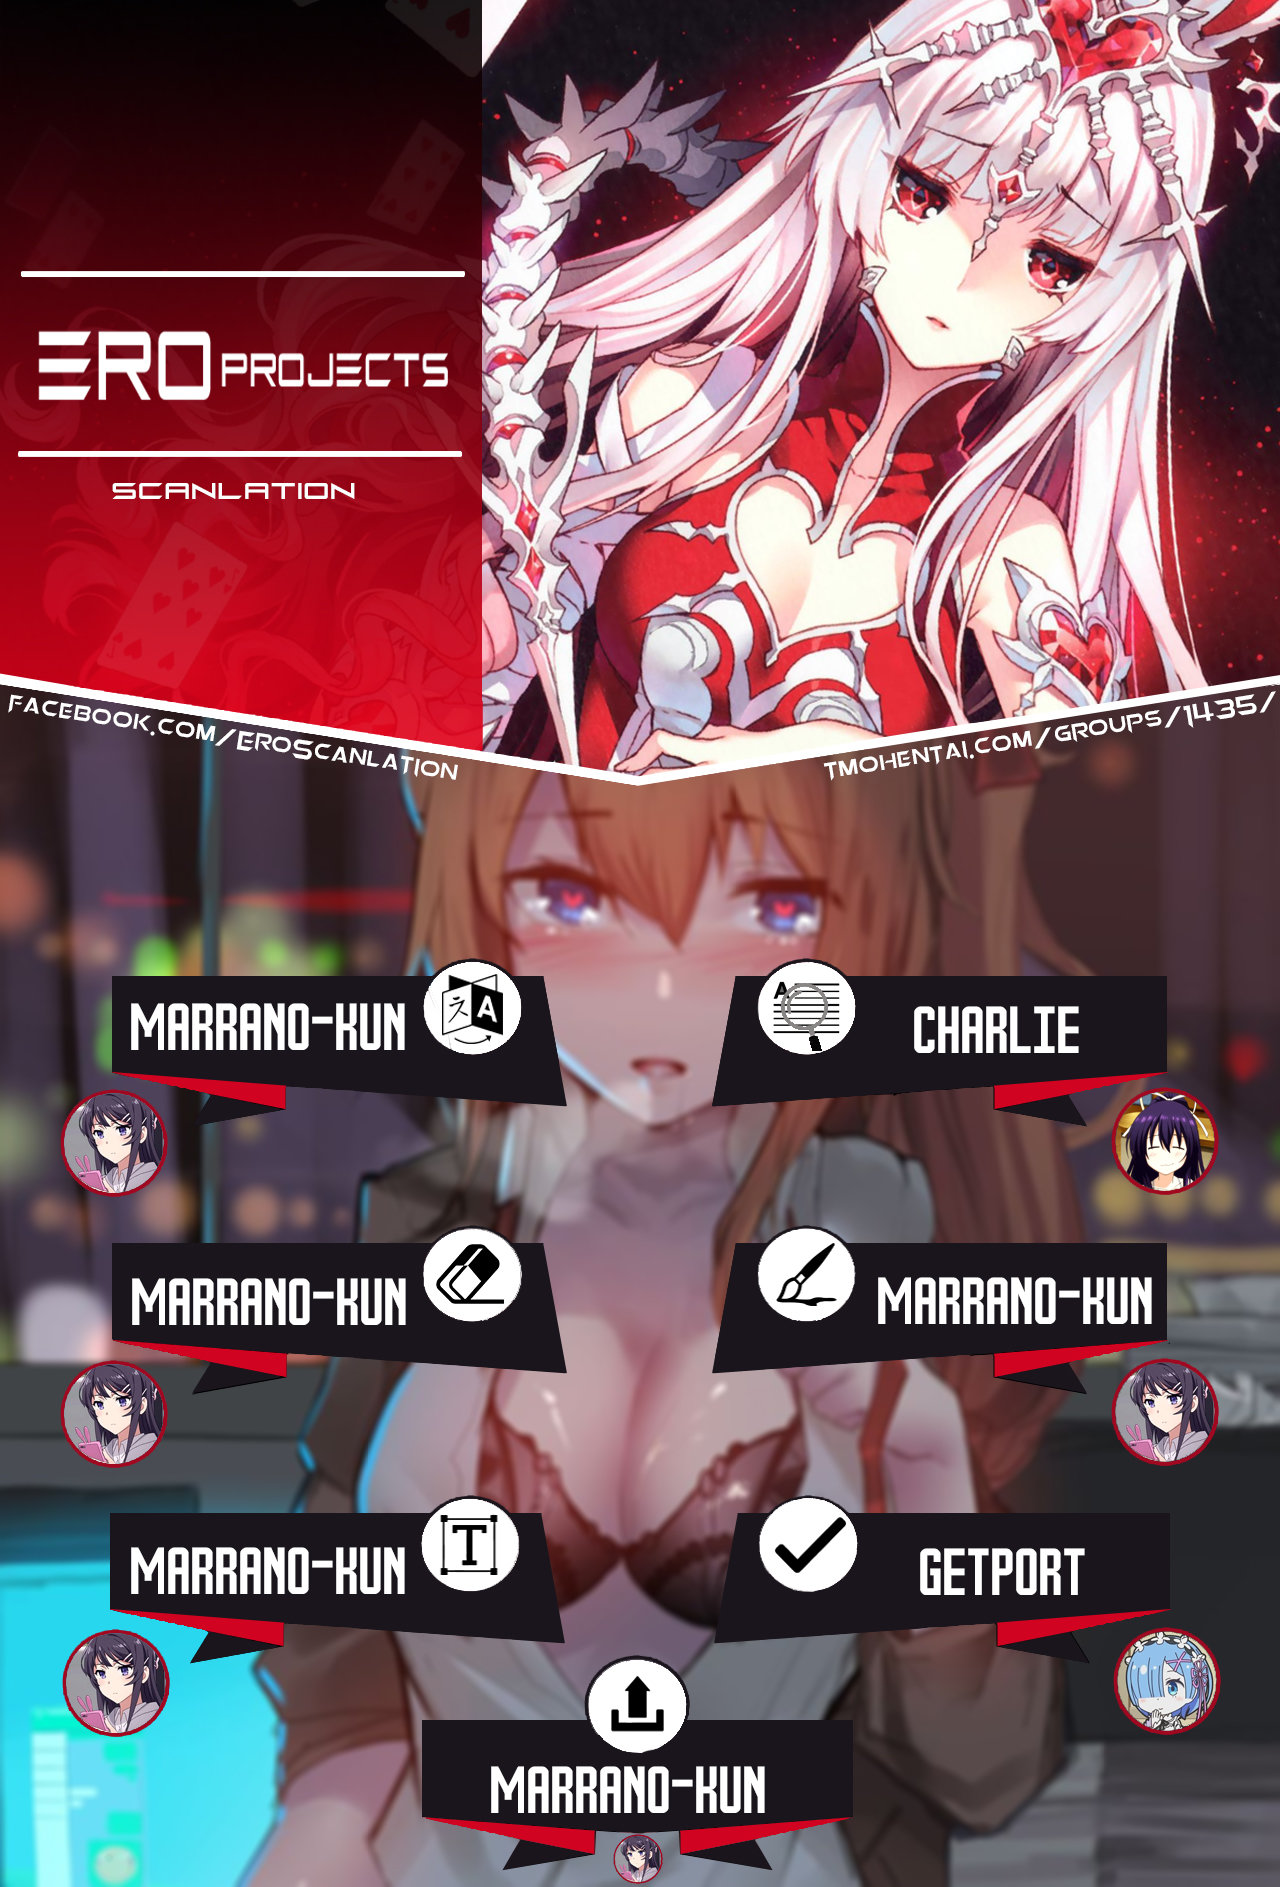 Sister Complex (Ero Projects) - 21